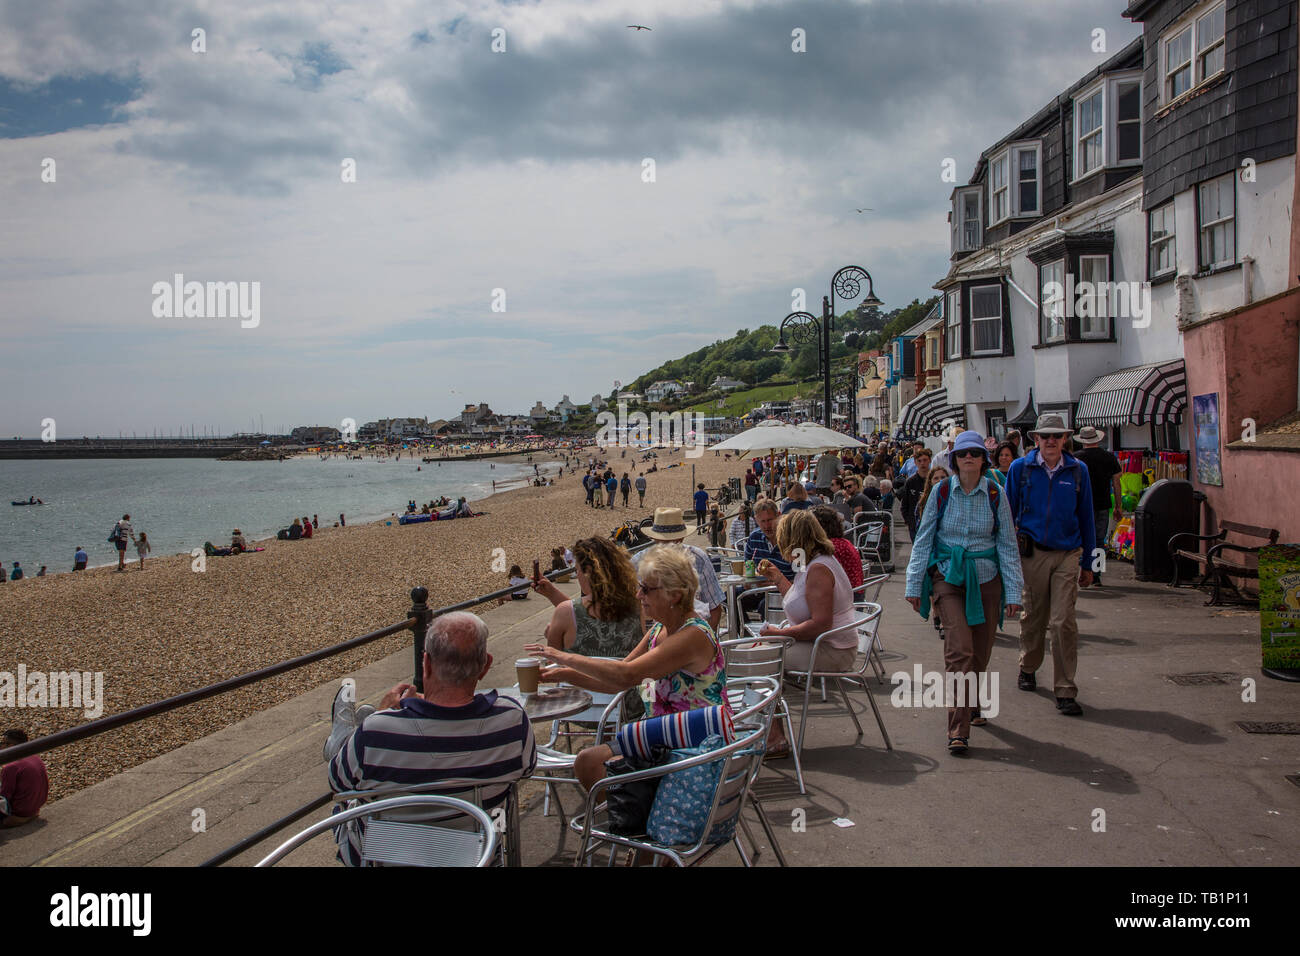 Lyme Regis, seaside town on the Jurassic Coastline set between the counties of West Dorset and East Devon, England, United Kingdom Stock Photo